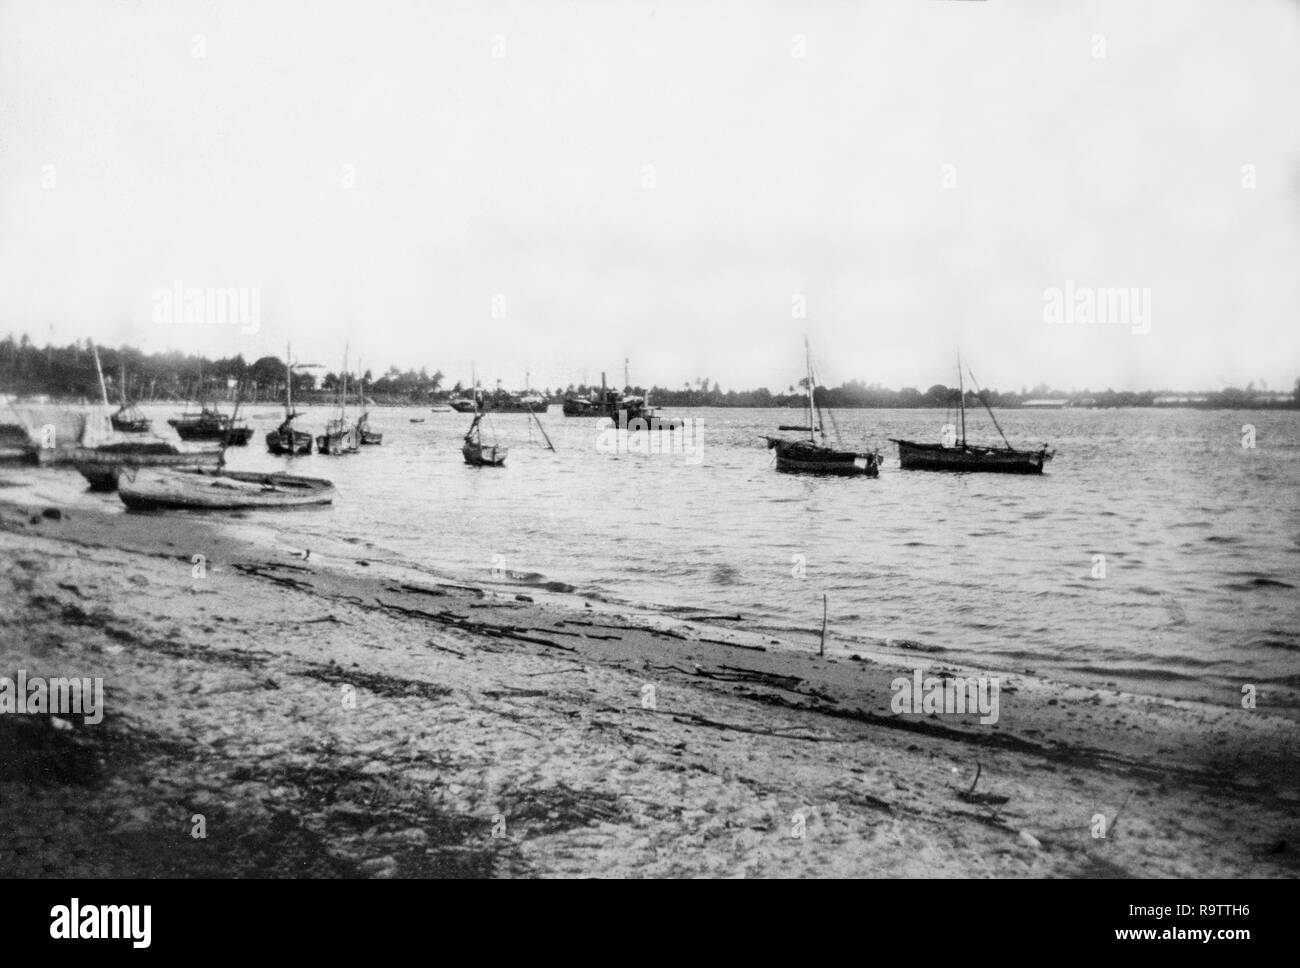 Early twentieth century black and white photograph showing boats in the harbour at Dar Es Salaam in east Africa. Stock Photo